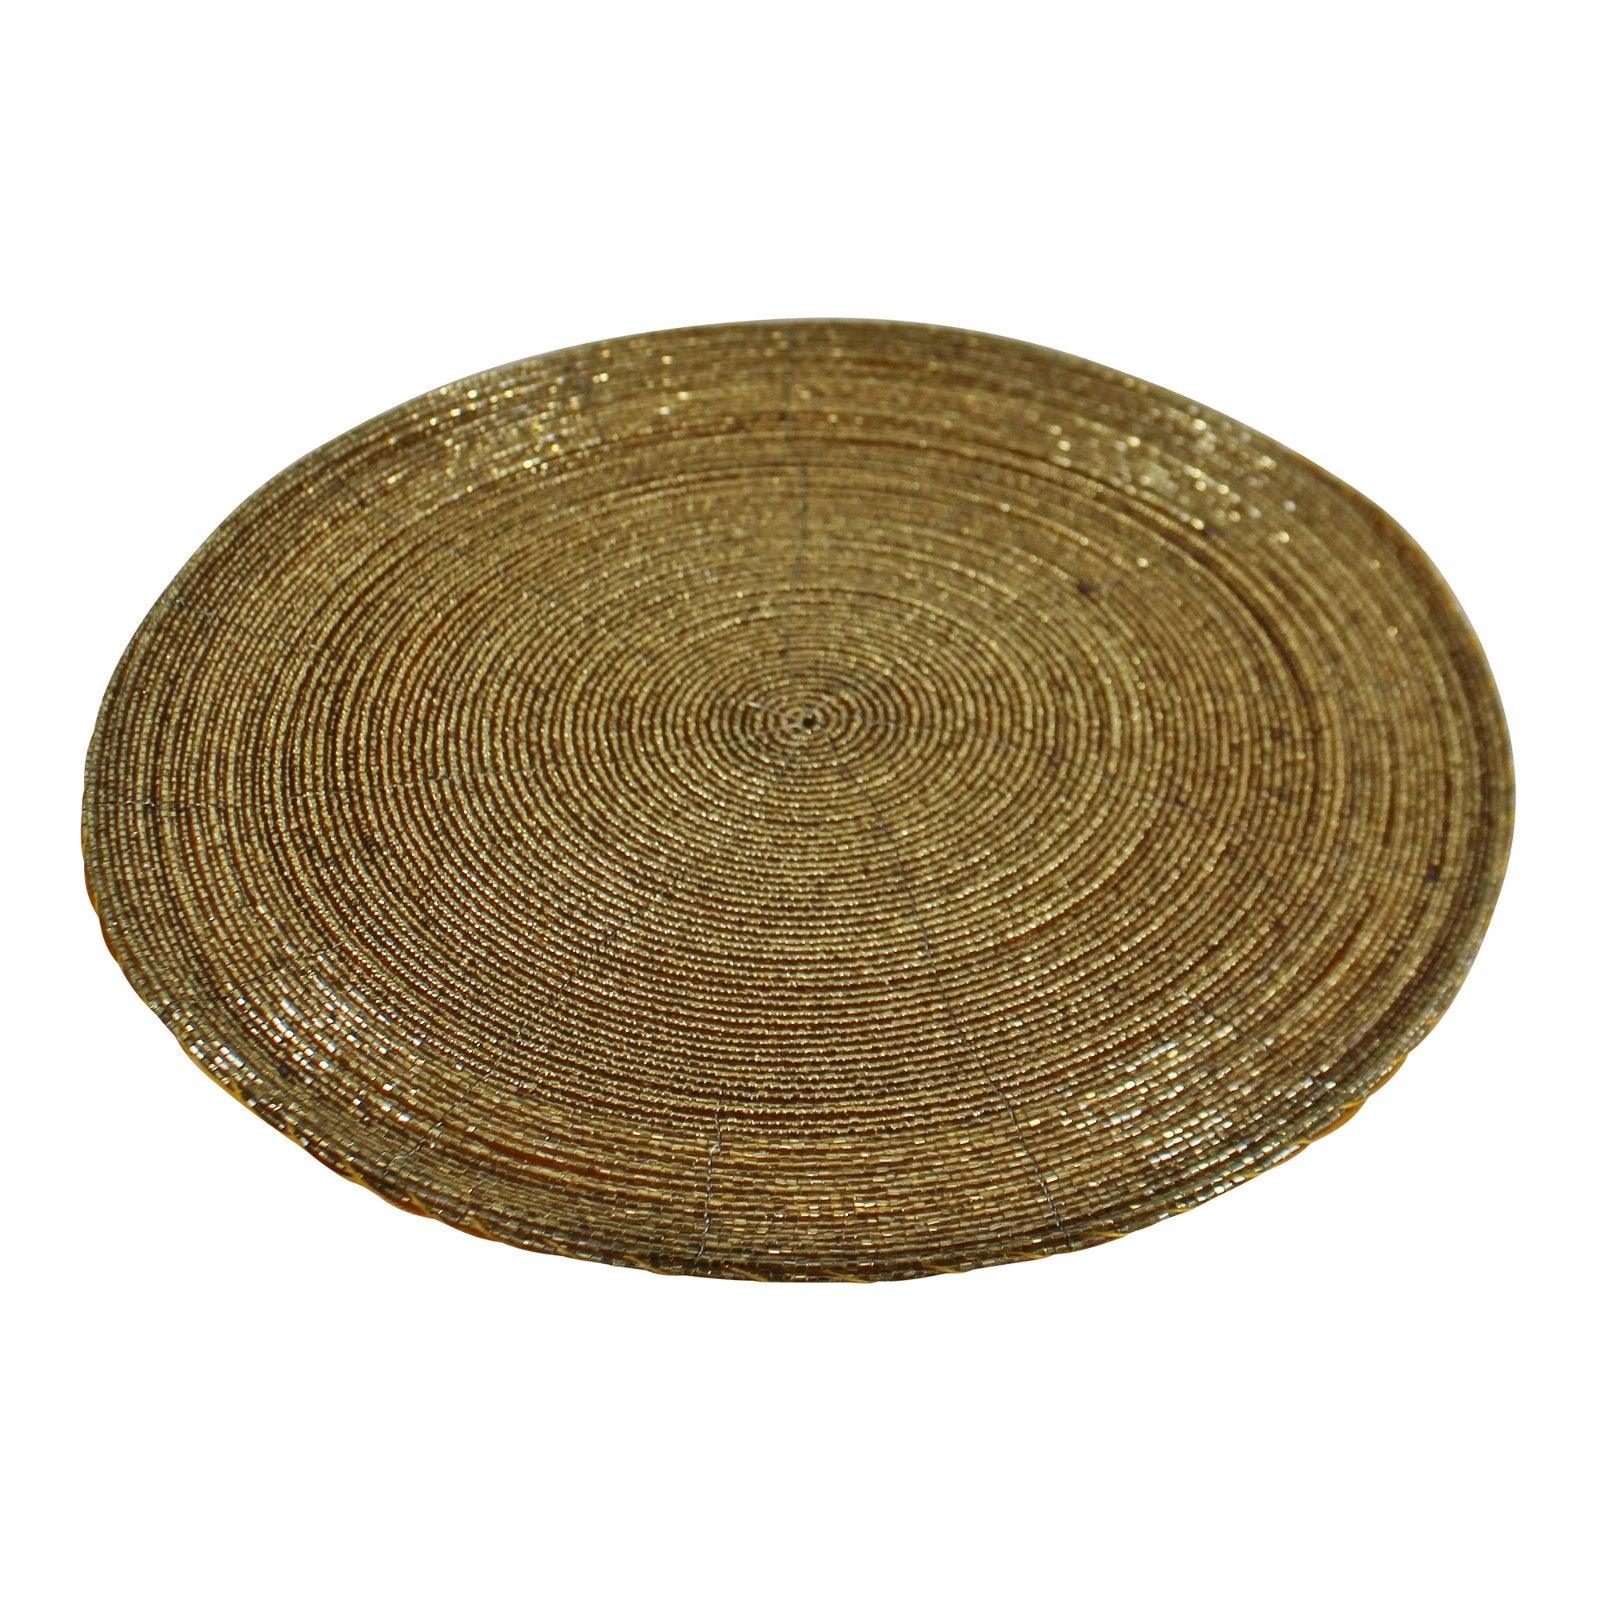 Set of 4 Gold Glass Beaded, Circular Placemats, 30x30cm-Coasters & Placemats